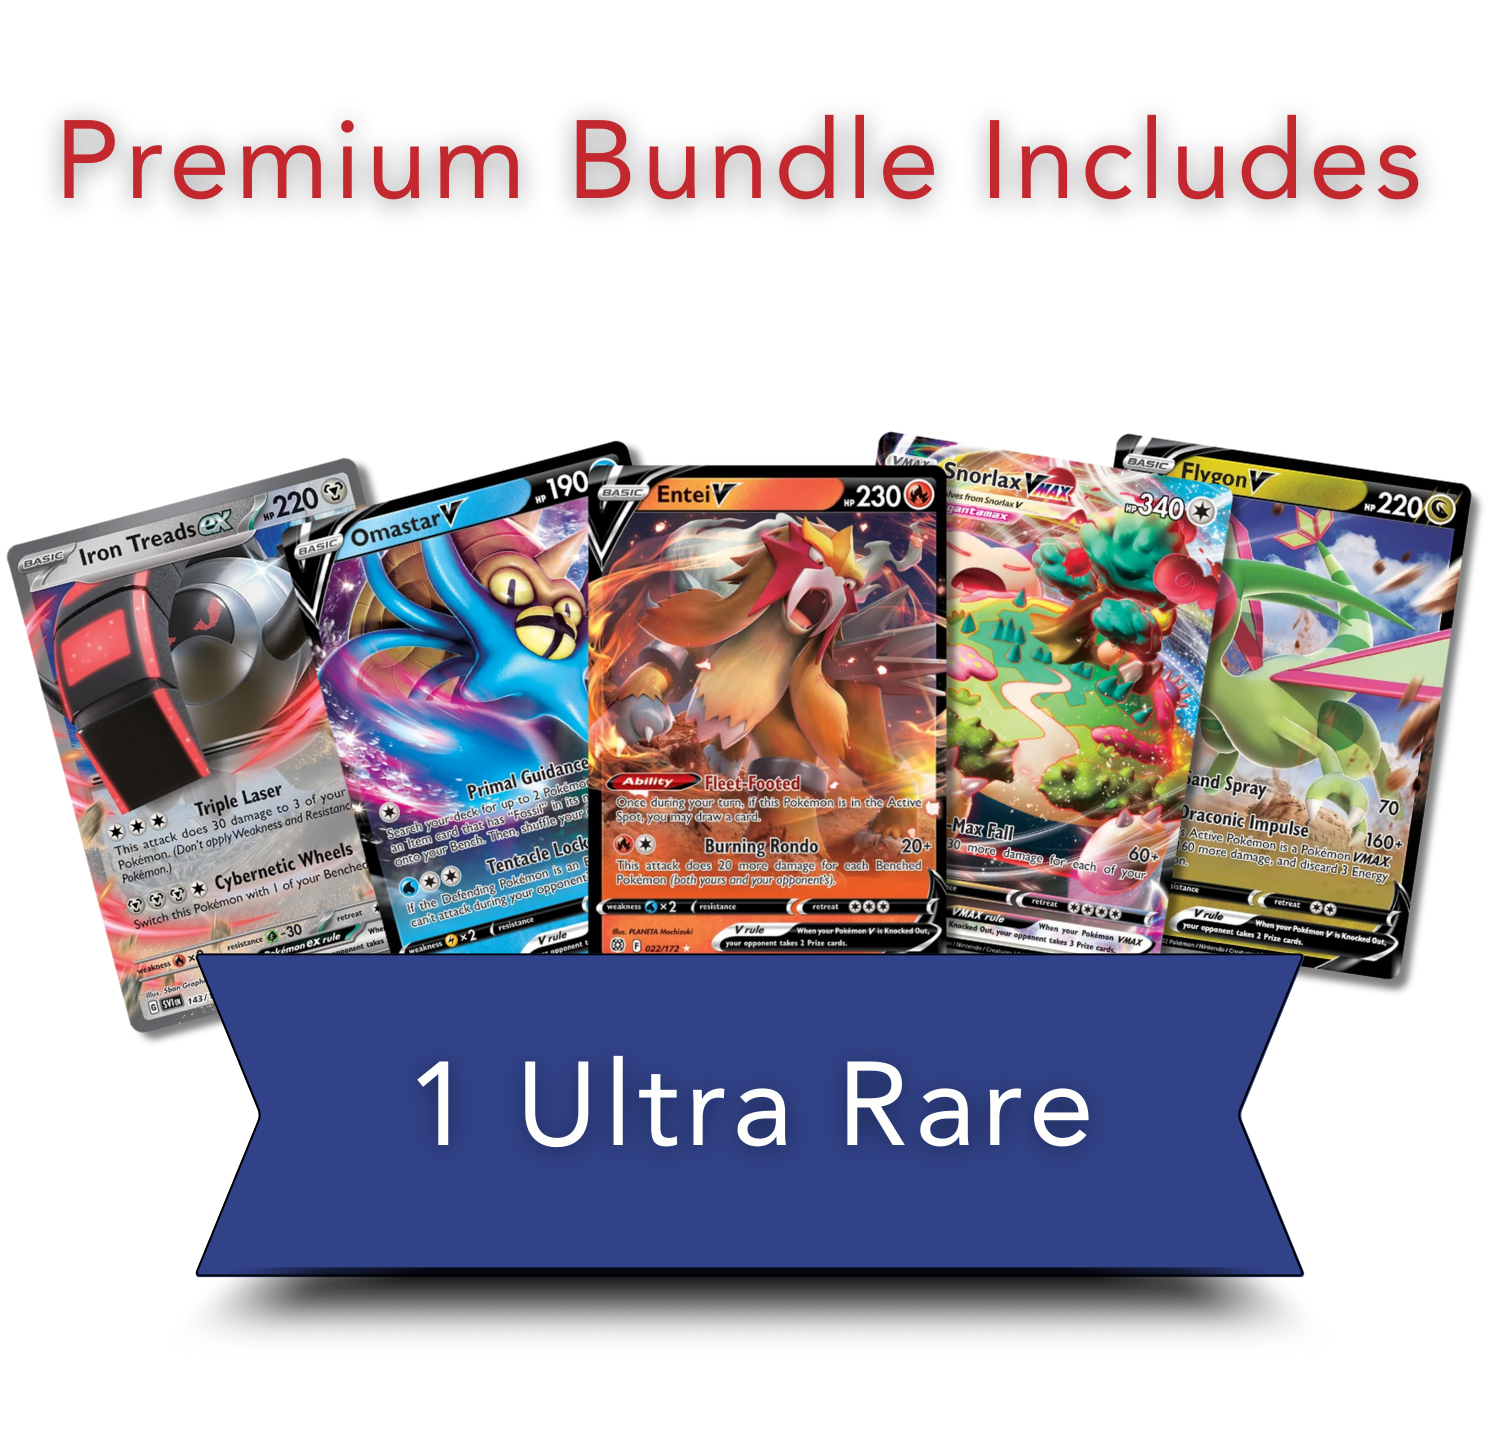 Exclusive Premium Bundle | 50 Genuine Cards | Includes 1 Guaranteed Ultra Rare: Legendary, VSTAR, VMAX, V, GX, or EX | Plus 2 Holos or Rares | BlueProton Deck Box compatible with trading cards